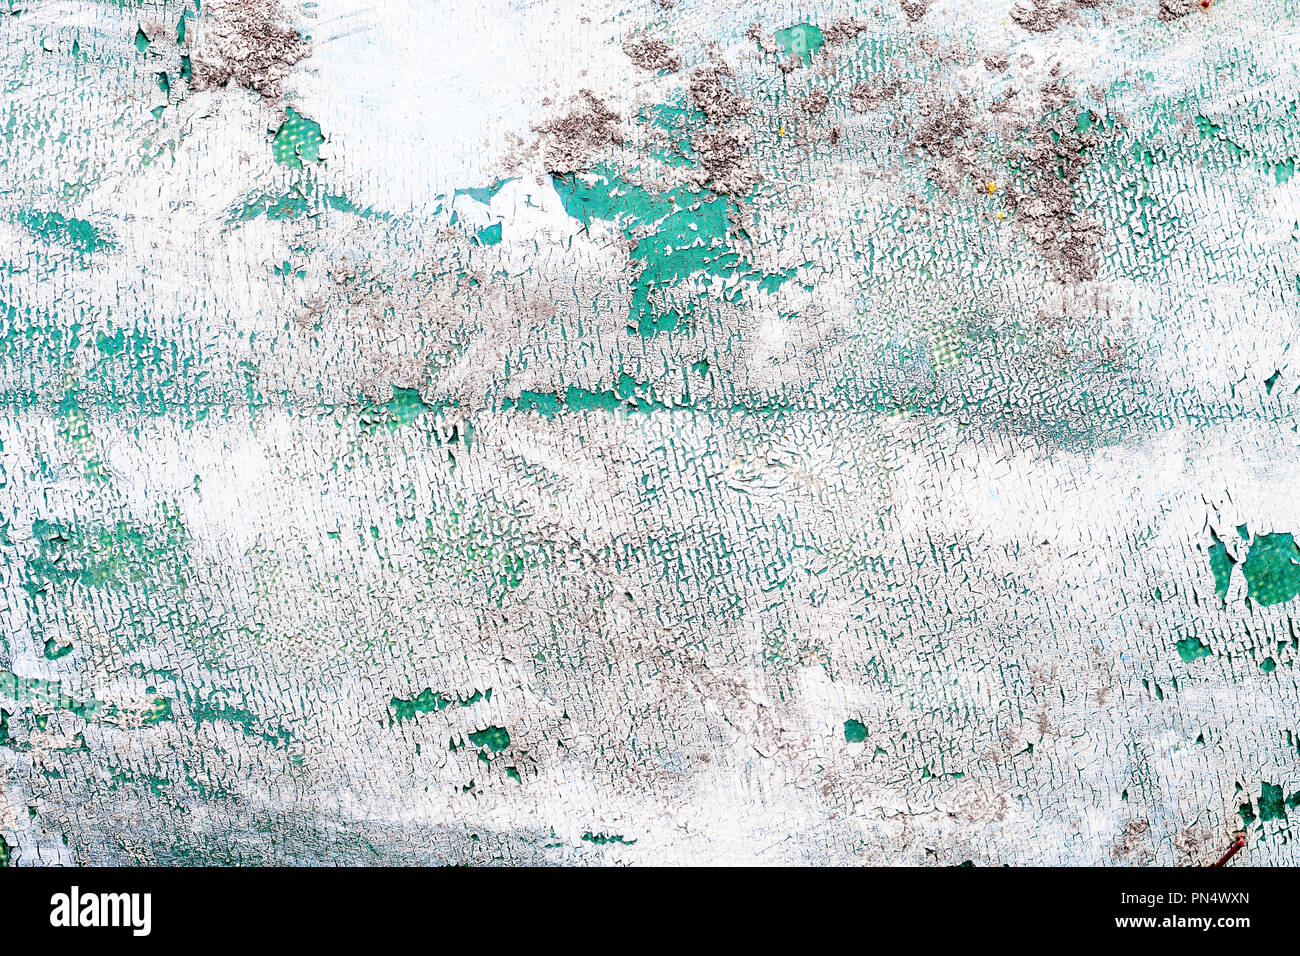 Cracked white paint layered on top of teal paint background texture Stock Photo